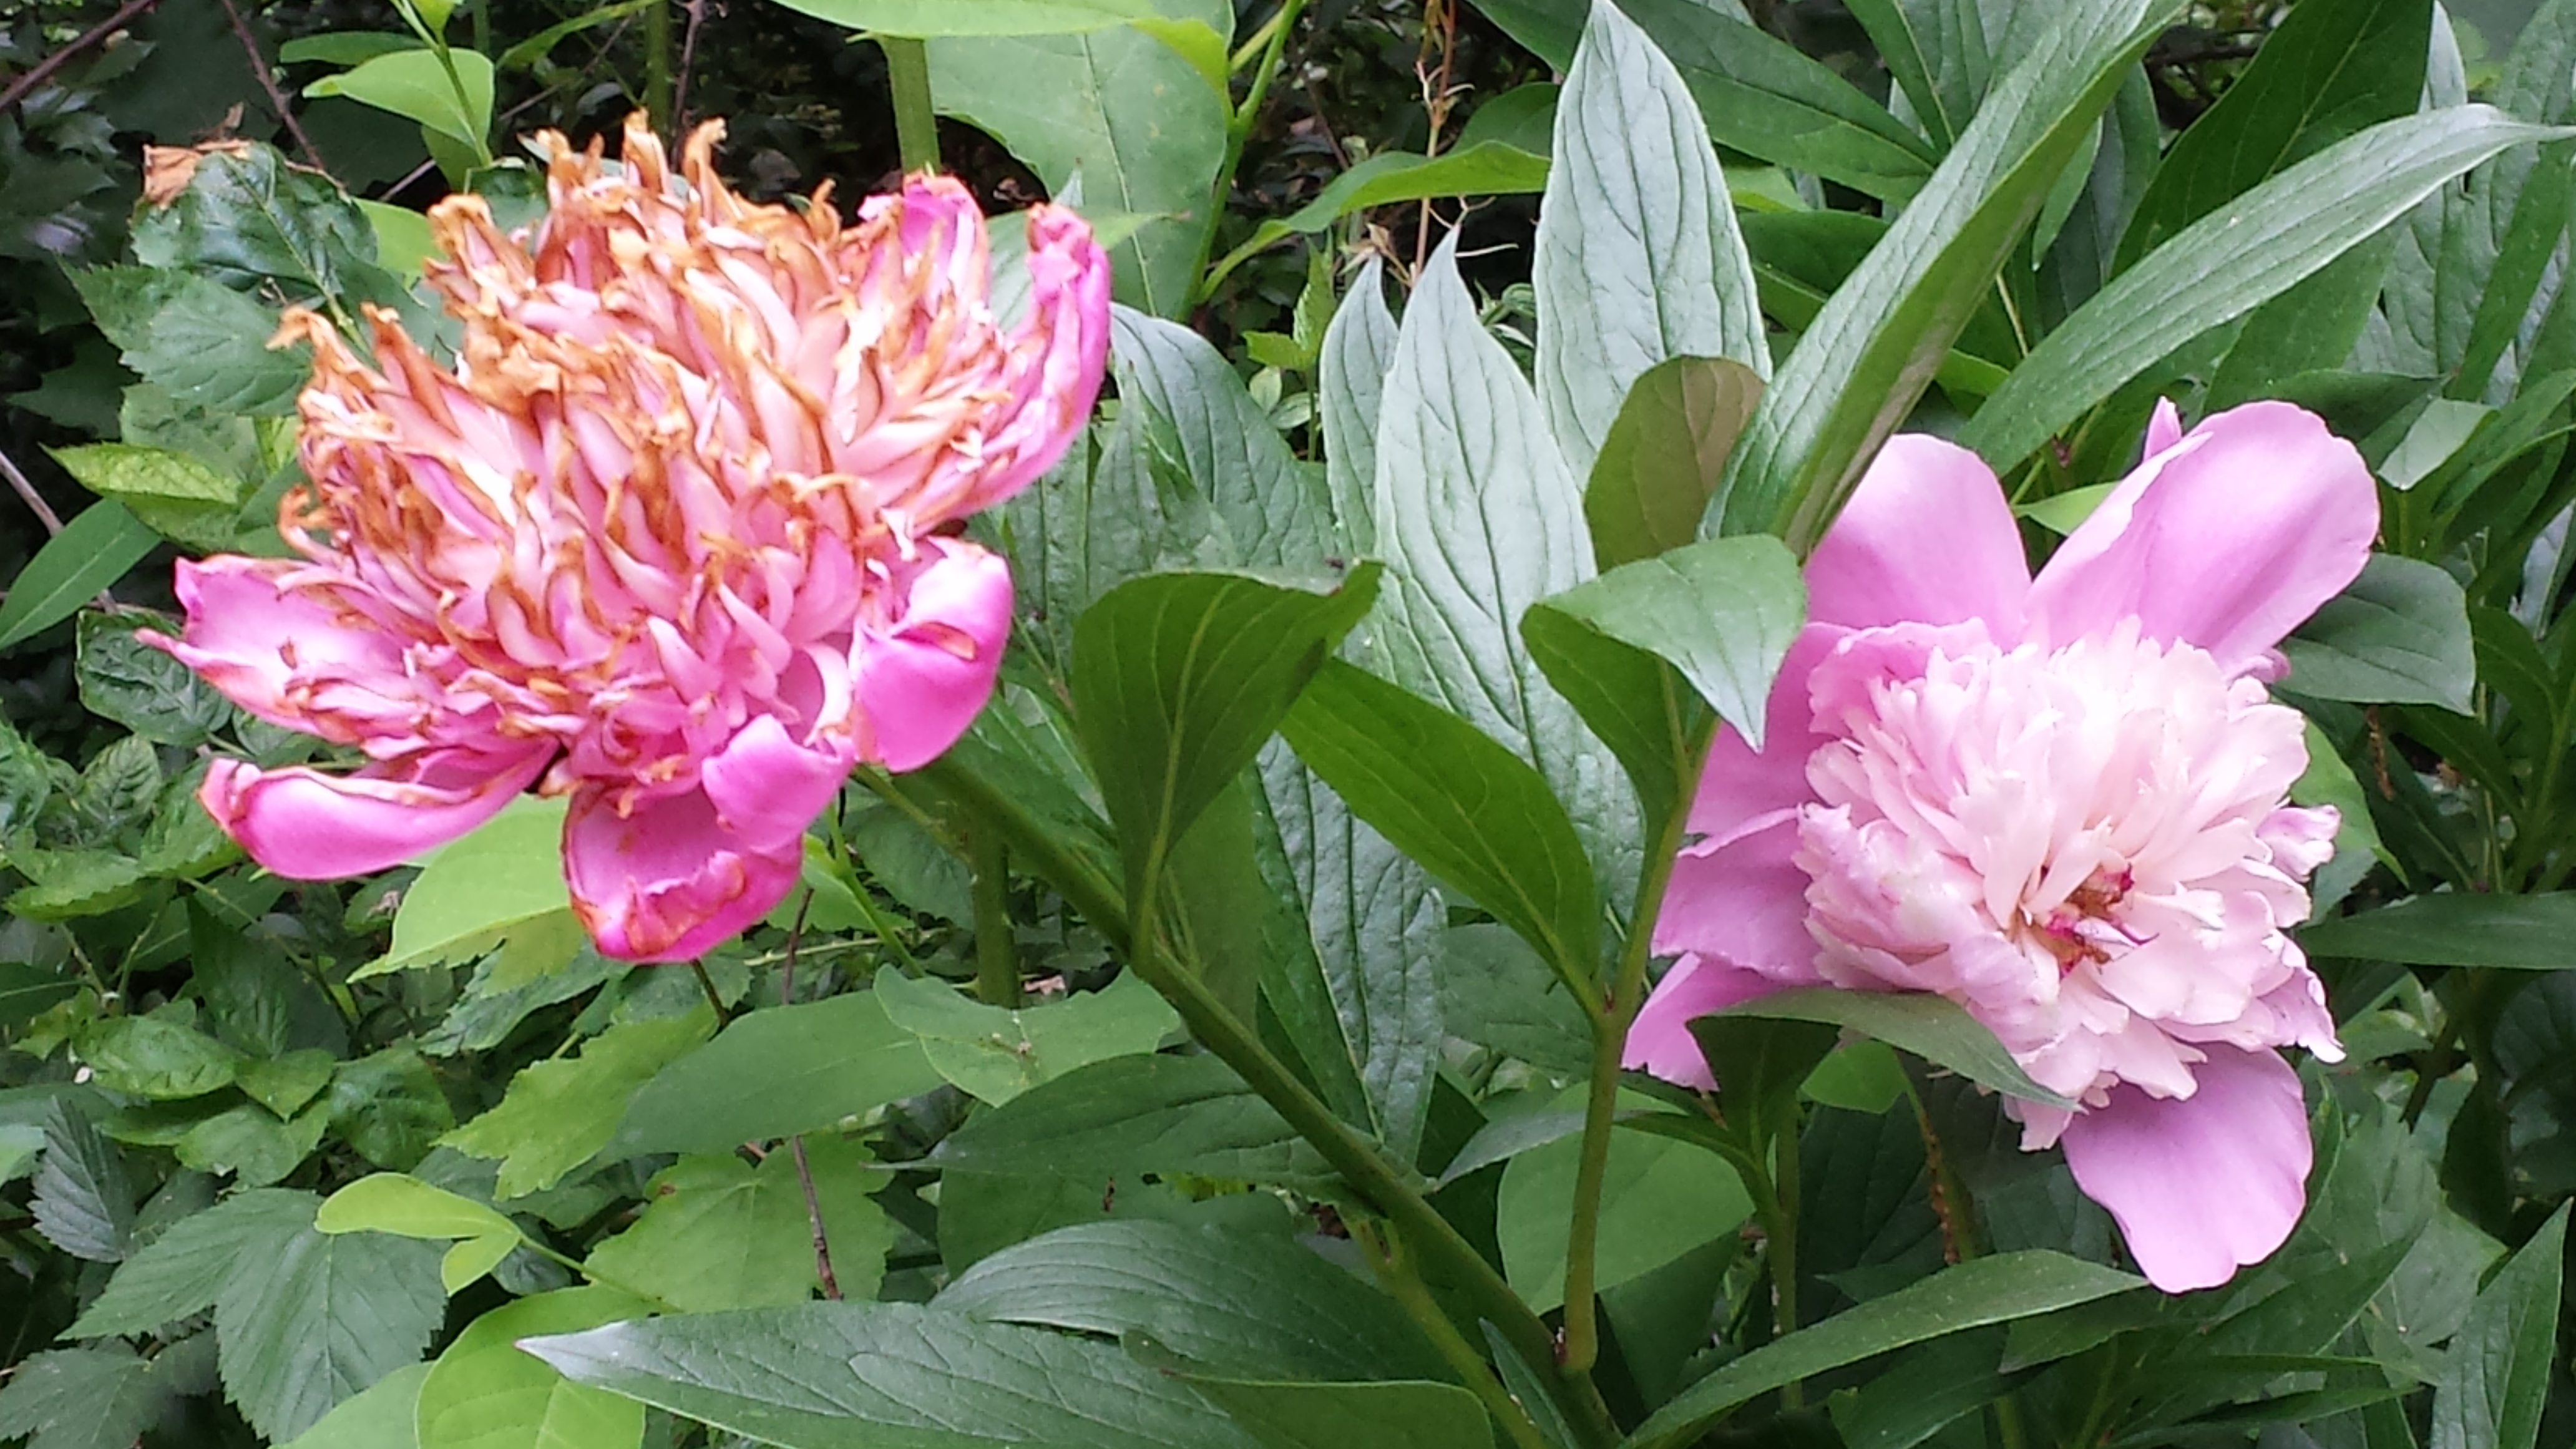 My peonies all bloomed and turned brown fairly quickly this year